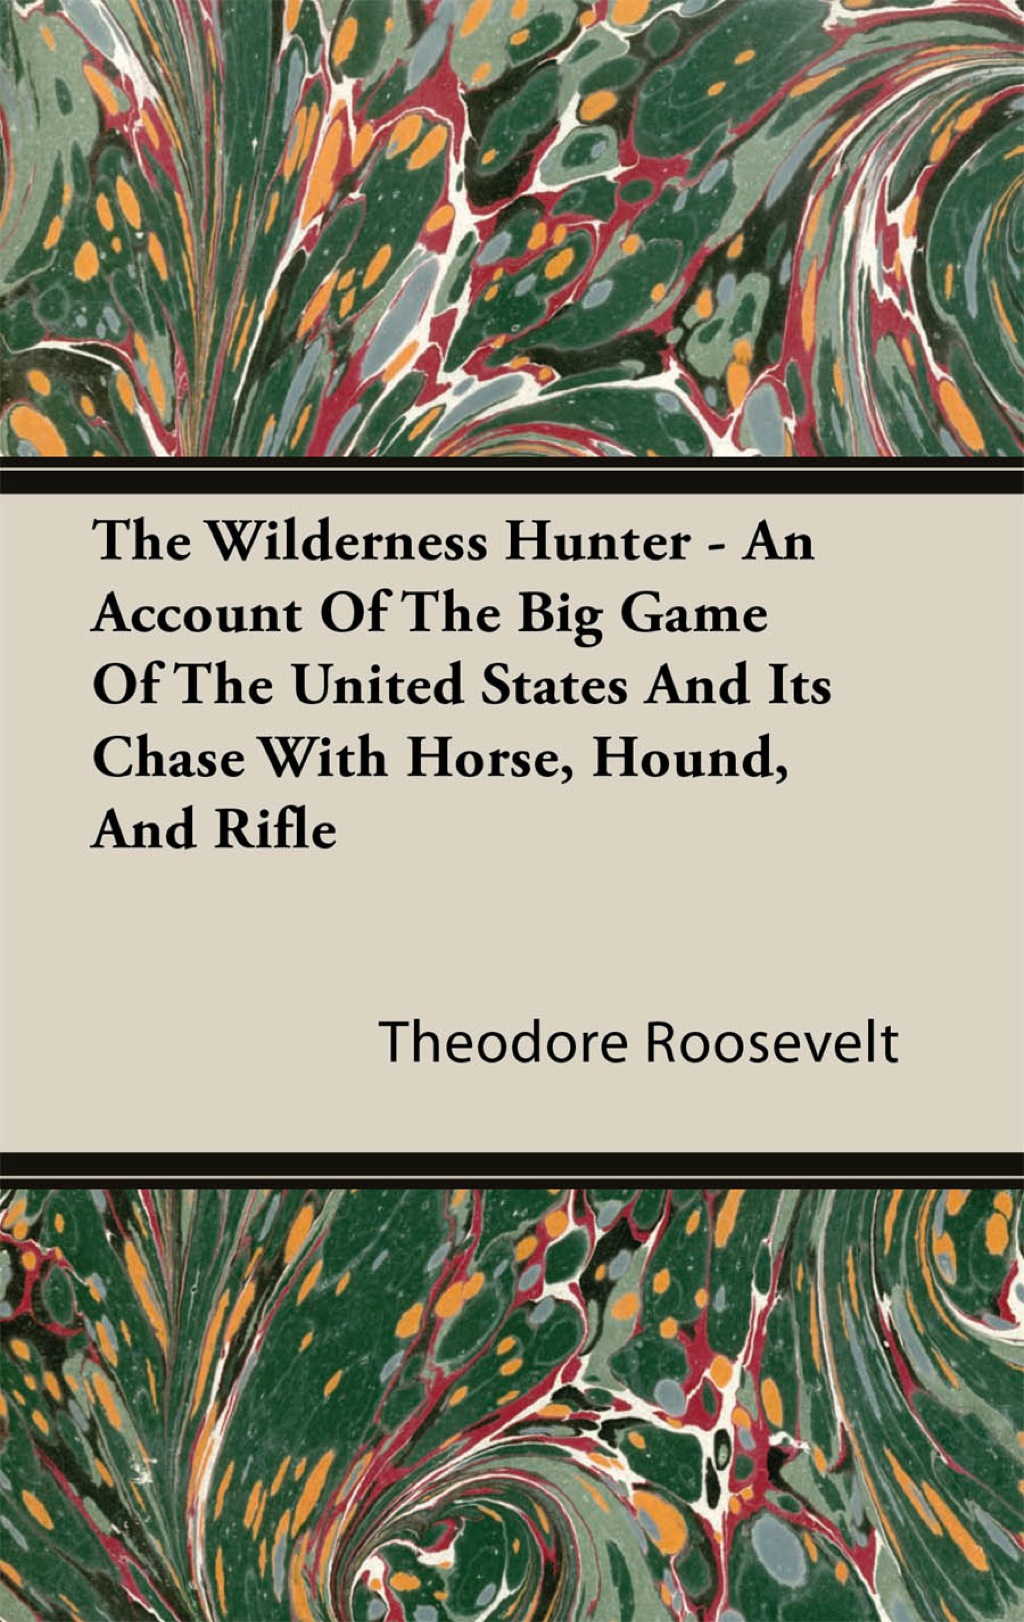 The Wilderness Hunter - An Account of the Big Game of the United States and Its Chase with Horse  Hound  and Rifle (eBook) - Theodore Roosevelt,